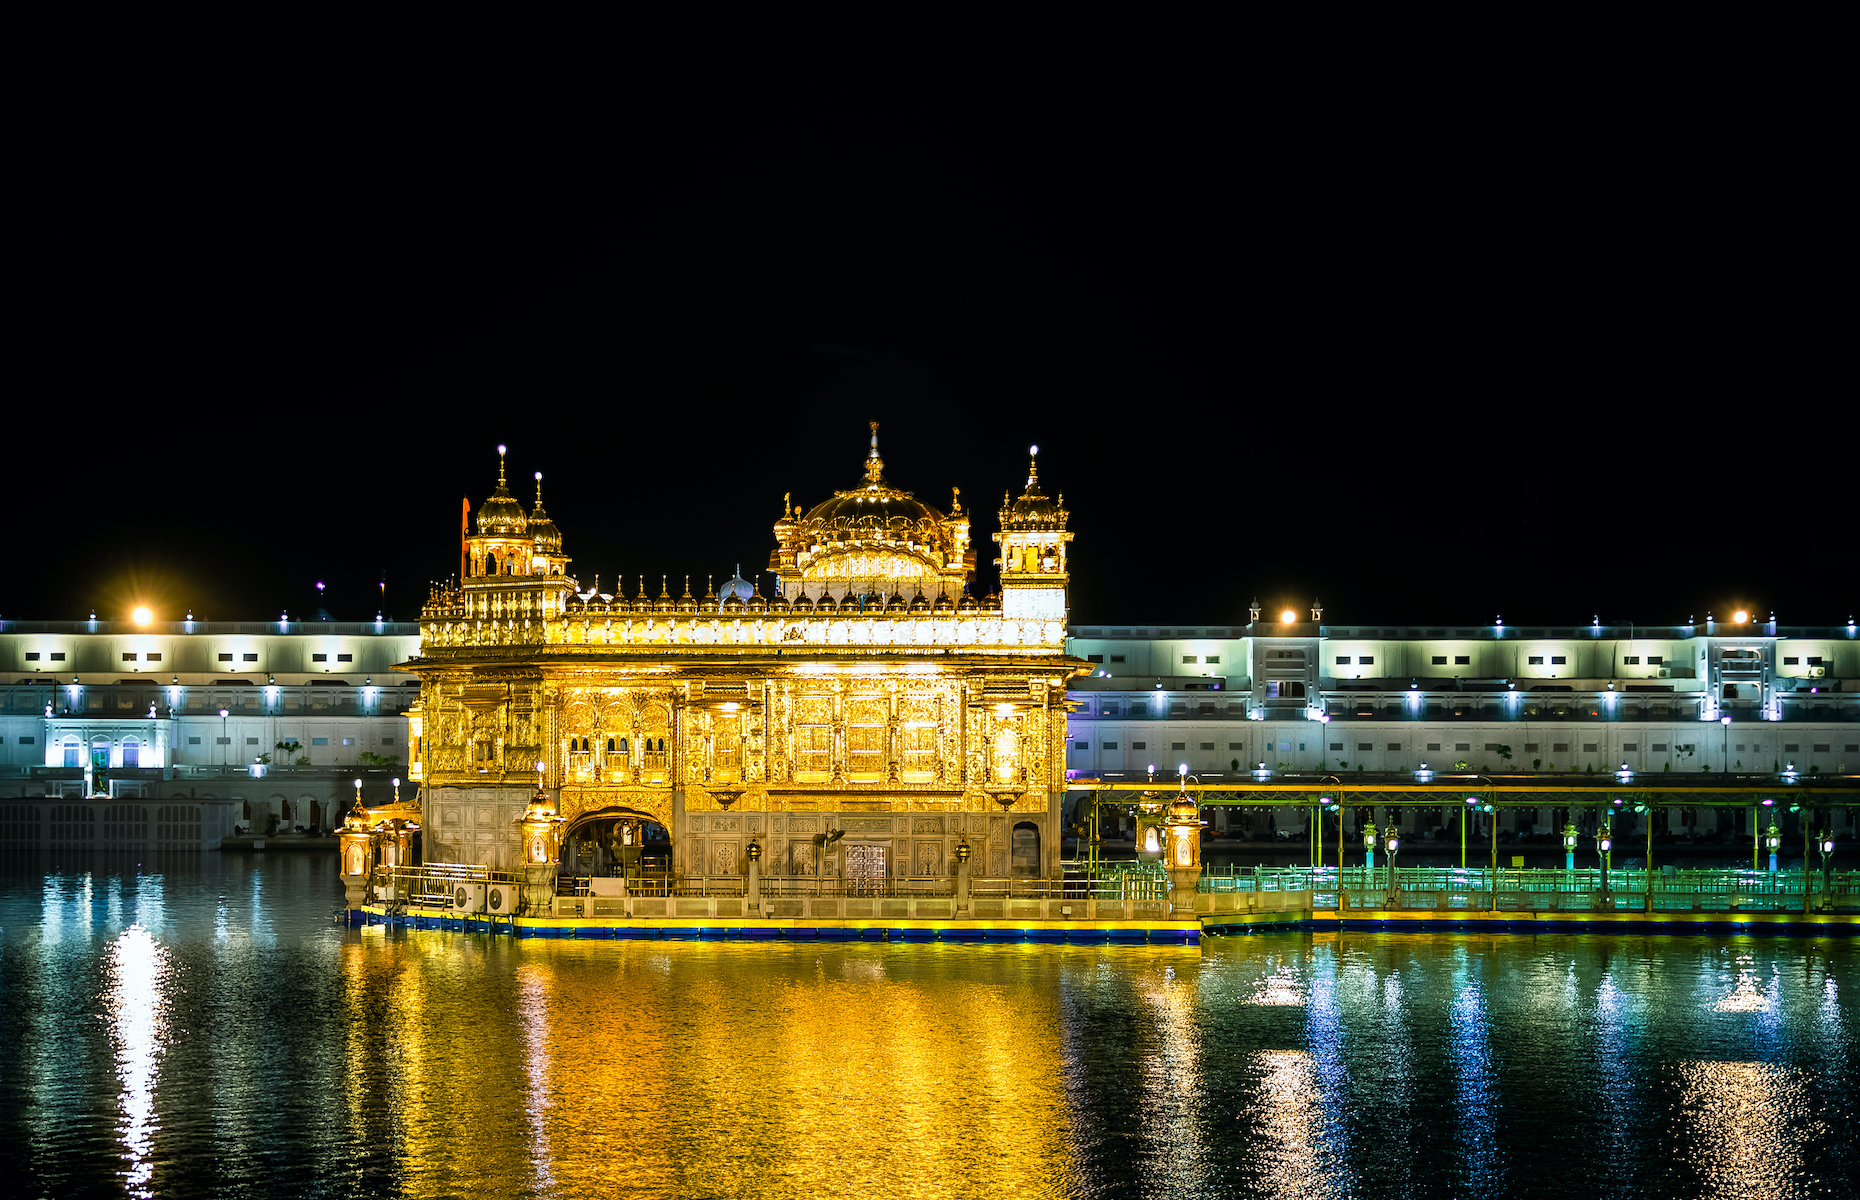 <p>The Harmandir Sahib, also known as the Golden Temple, is the holiest Sikh shrine. The building, completed in 1604, is topped by domes covered with gold plates and decorated with multi-coloured <a href="https://www.goldentempleamritsar.org/famous-temples-in-india/amritsar/golden-temple/art-and-architecture.php" rel="noreferrer noopener">marble and semi-precious stones.</a> Its location, below the level of the city, is supposed to symbolize humility. Nearly 100,000 pilgrims visit the site, and many bathe each day in the waters of its basin, which are believed to have healing powers.</p>